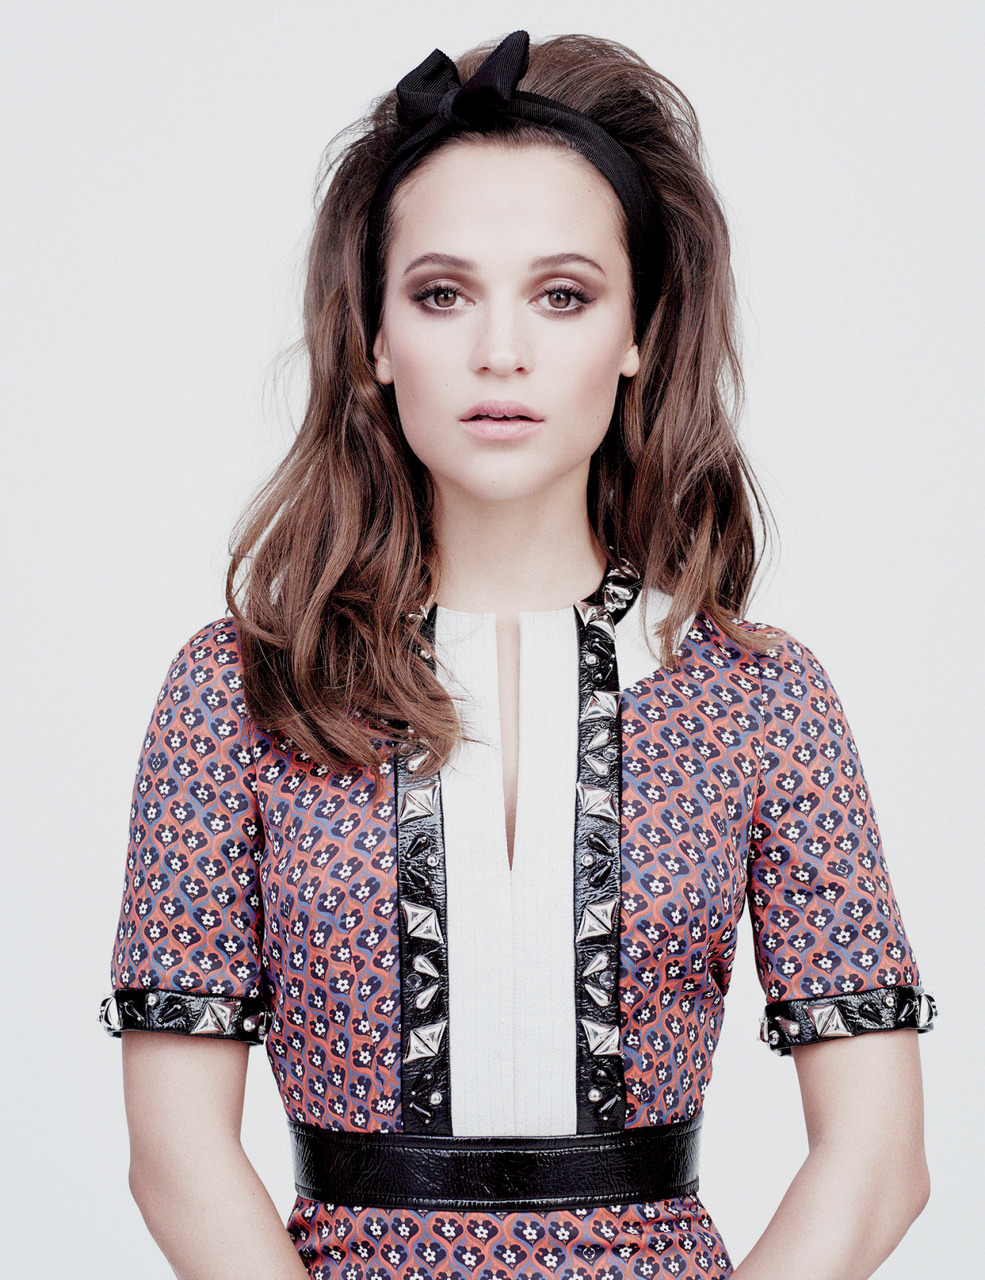 The North Star Alicia Vikander Photographed By